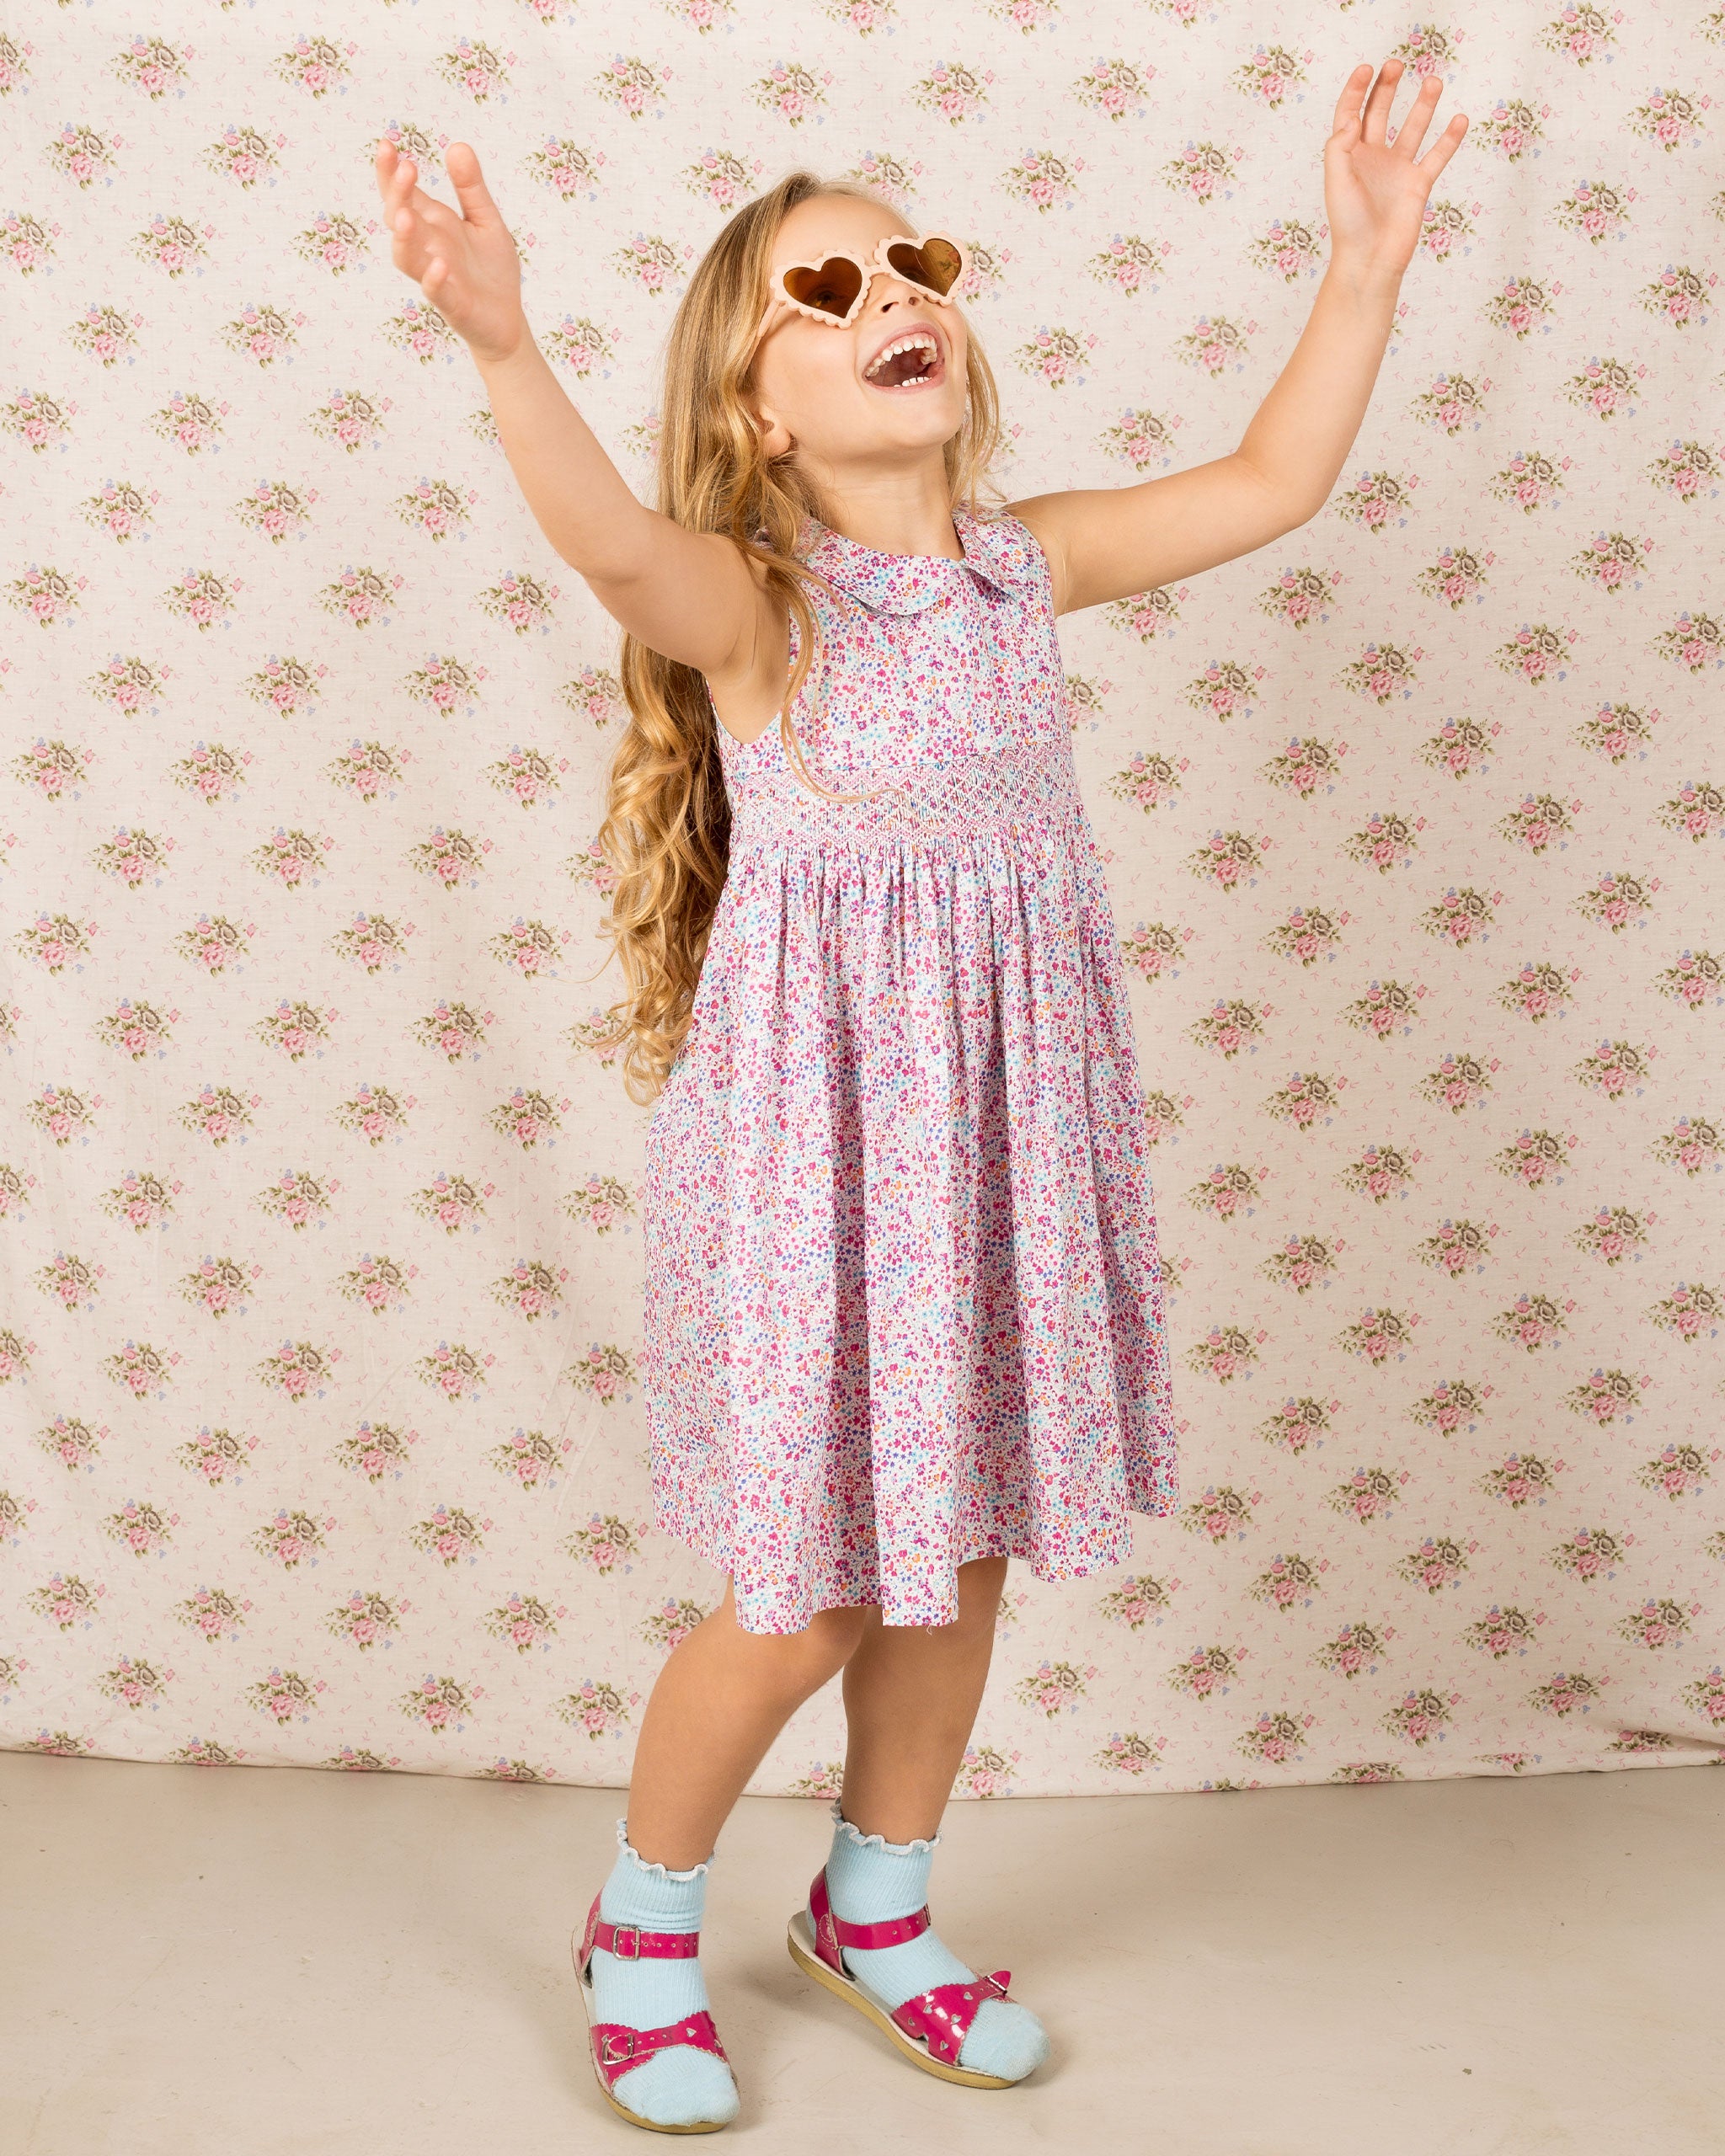 girl having fun in a pink floral summer dress